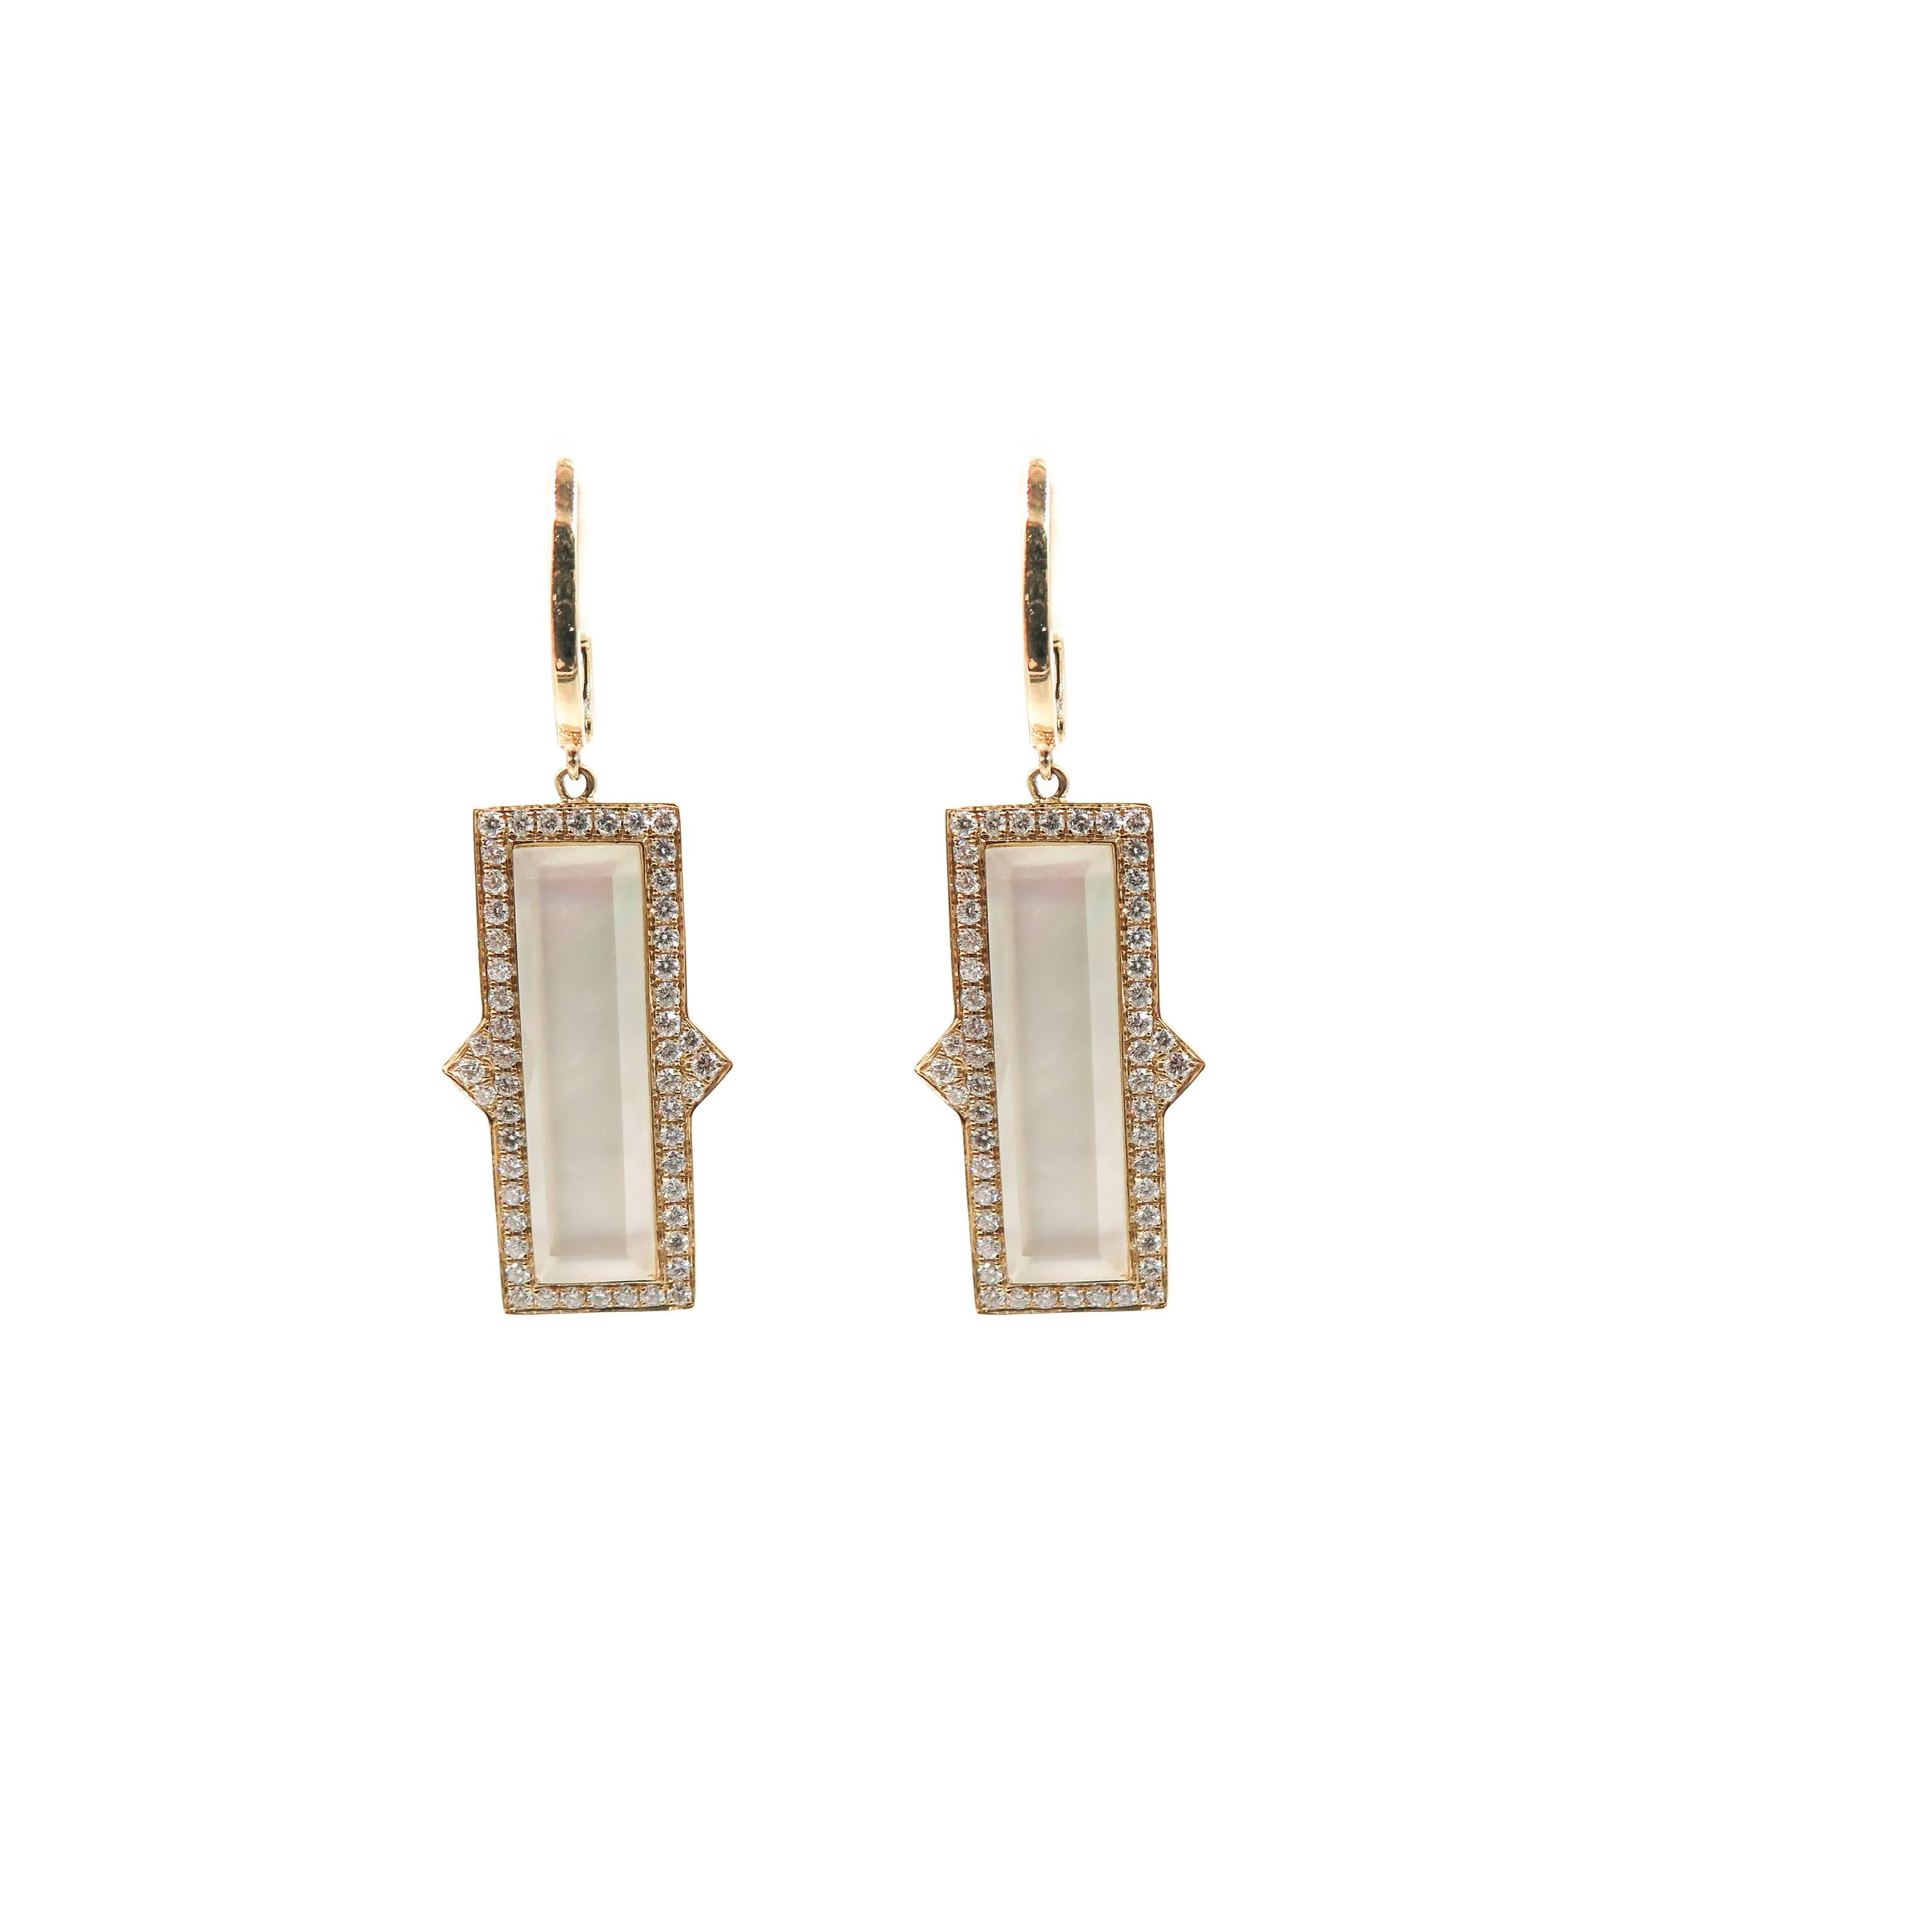 Inspired by the delicate, exotic and graceful orchid flower. This Mother of Pearl and Diamond Earrings features the Incredible, iridescent reflection and luster of white mother of pearl at the front and center, checker-cut clear quartz is layered